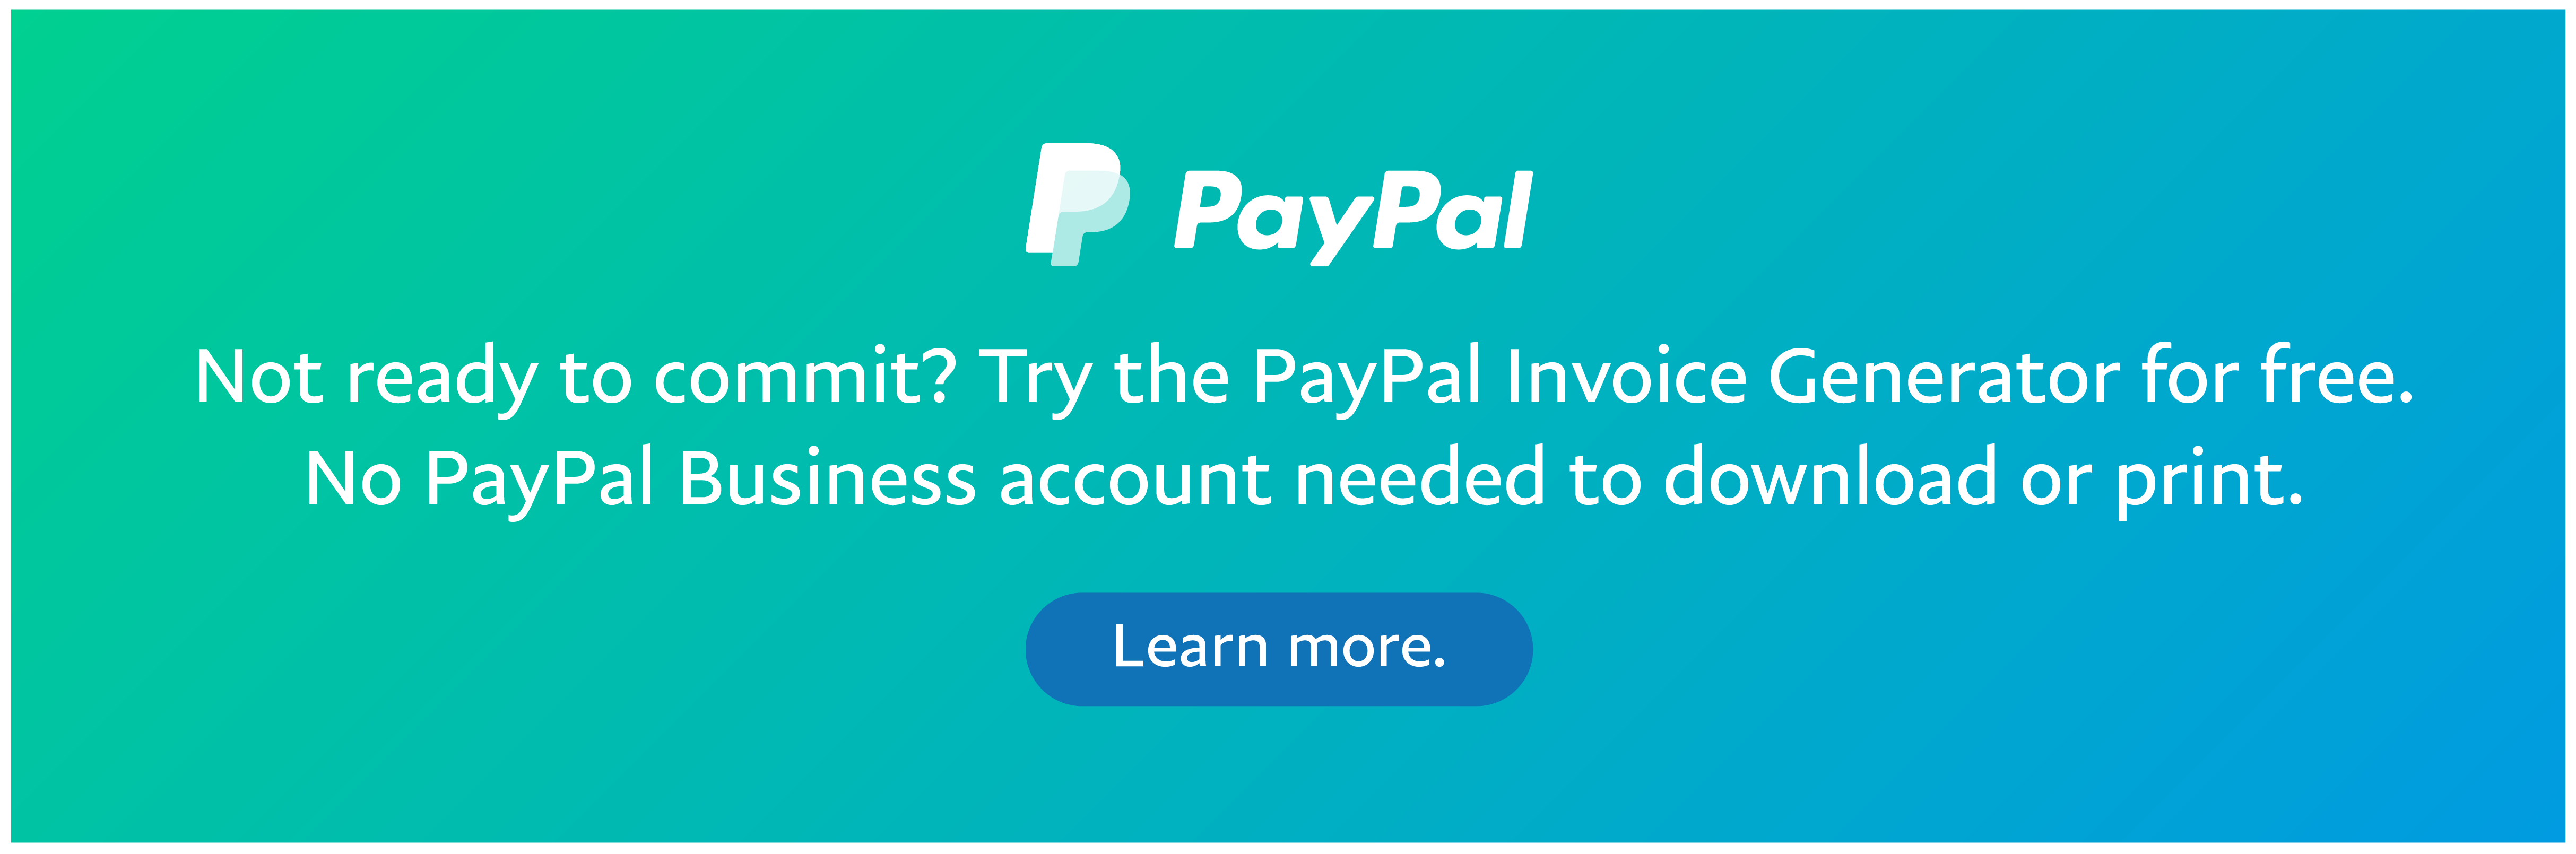 Try the PayPal Invoice Generator for free. You don't need an account to download or print.